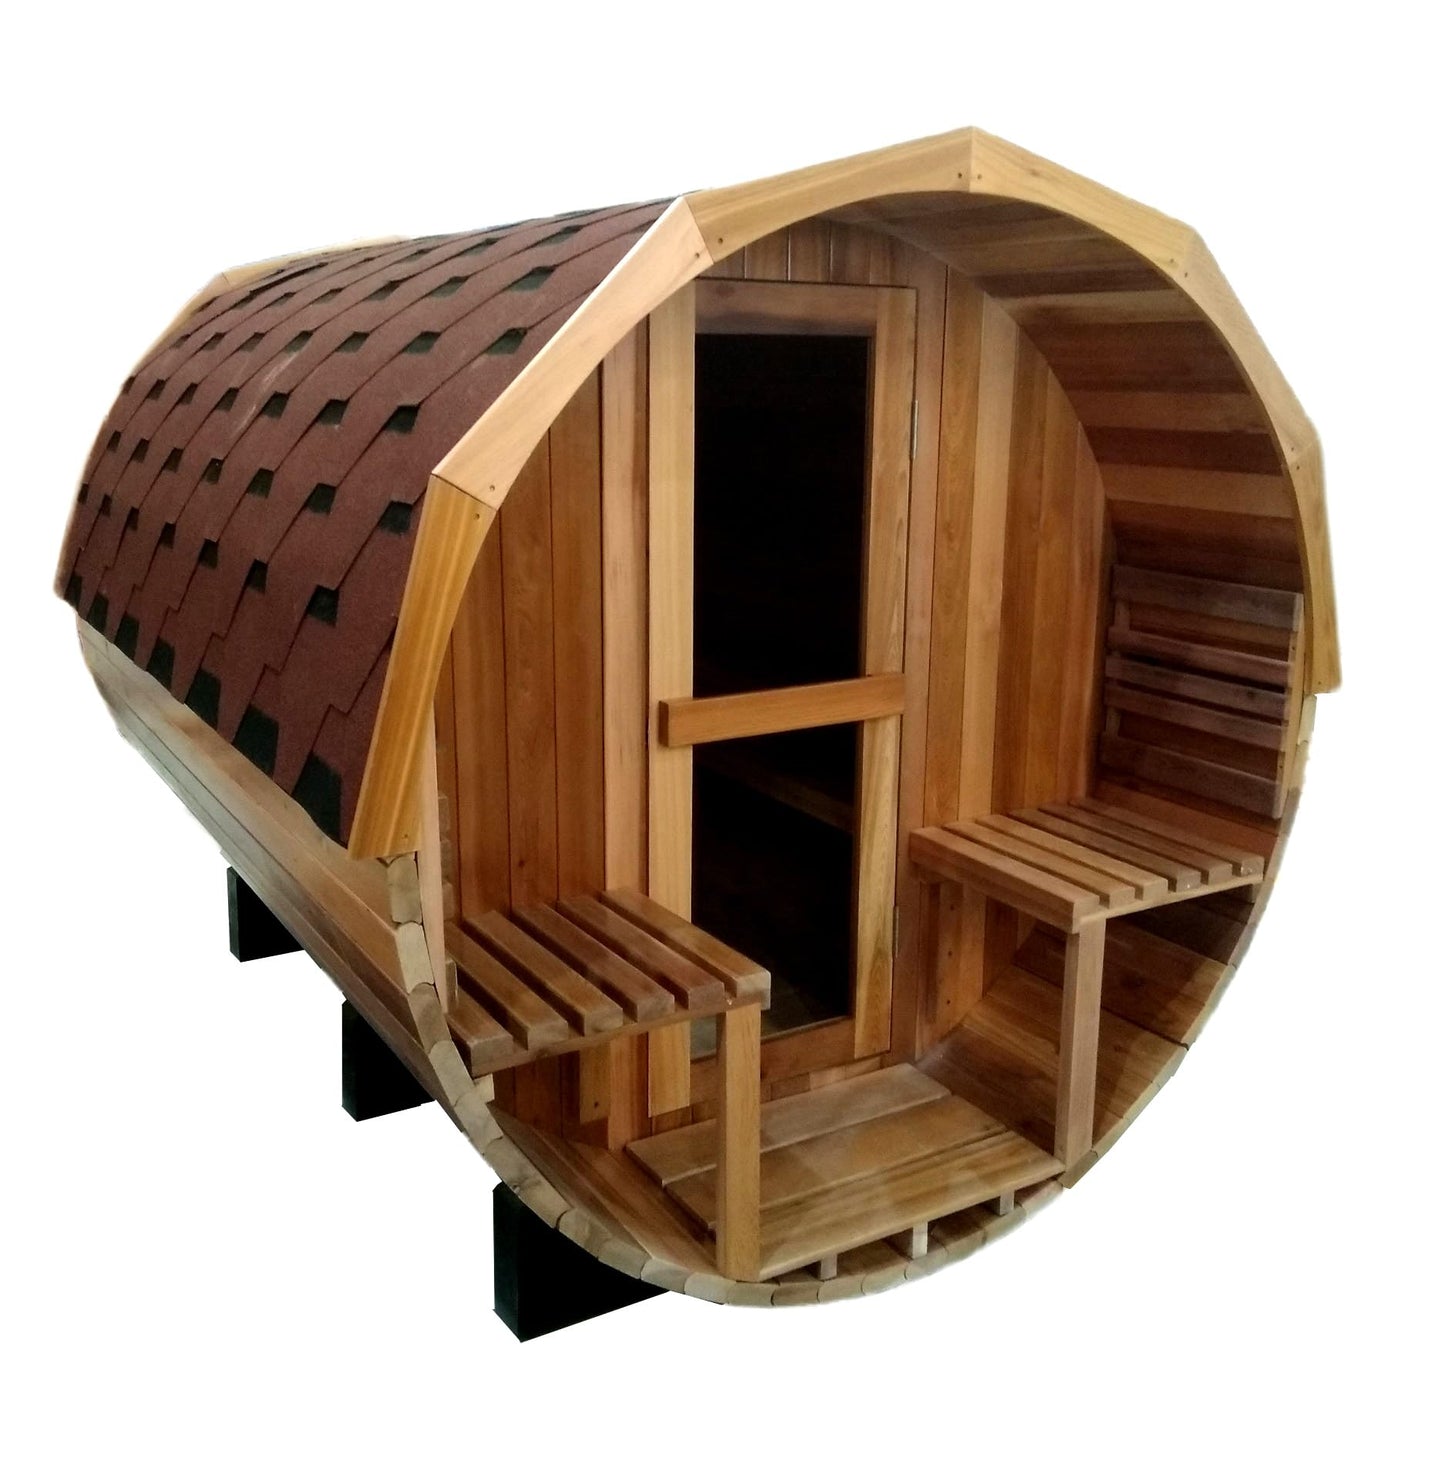 Canadian Pine Wood 8' 6 to 8 Person Outdoor Barrel Sauna with Porch, 9KW Wet Dry 220V Heater, Tempered Glass Door